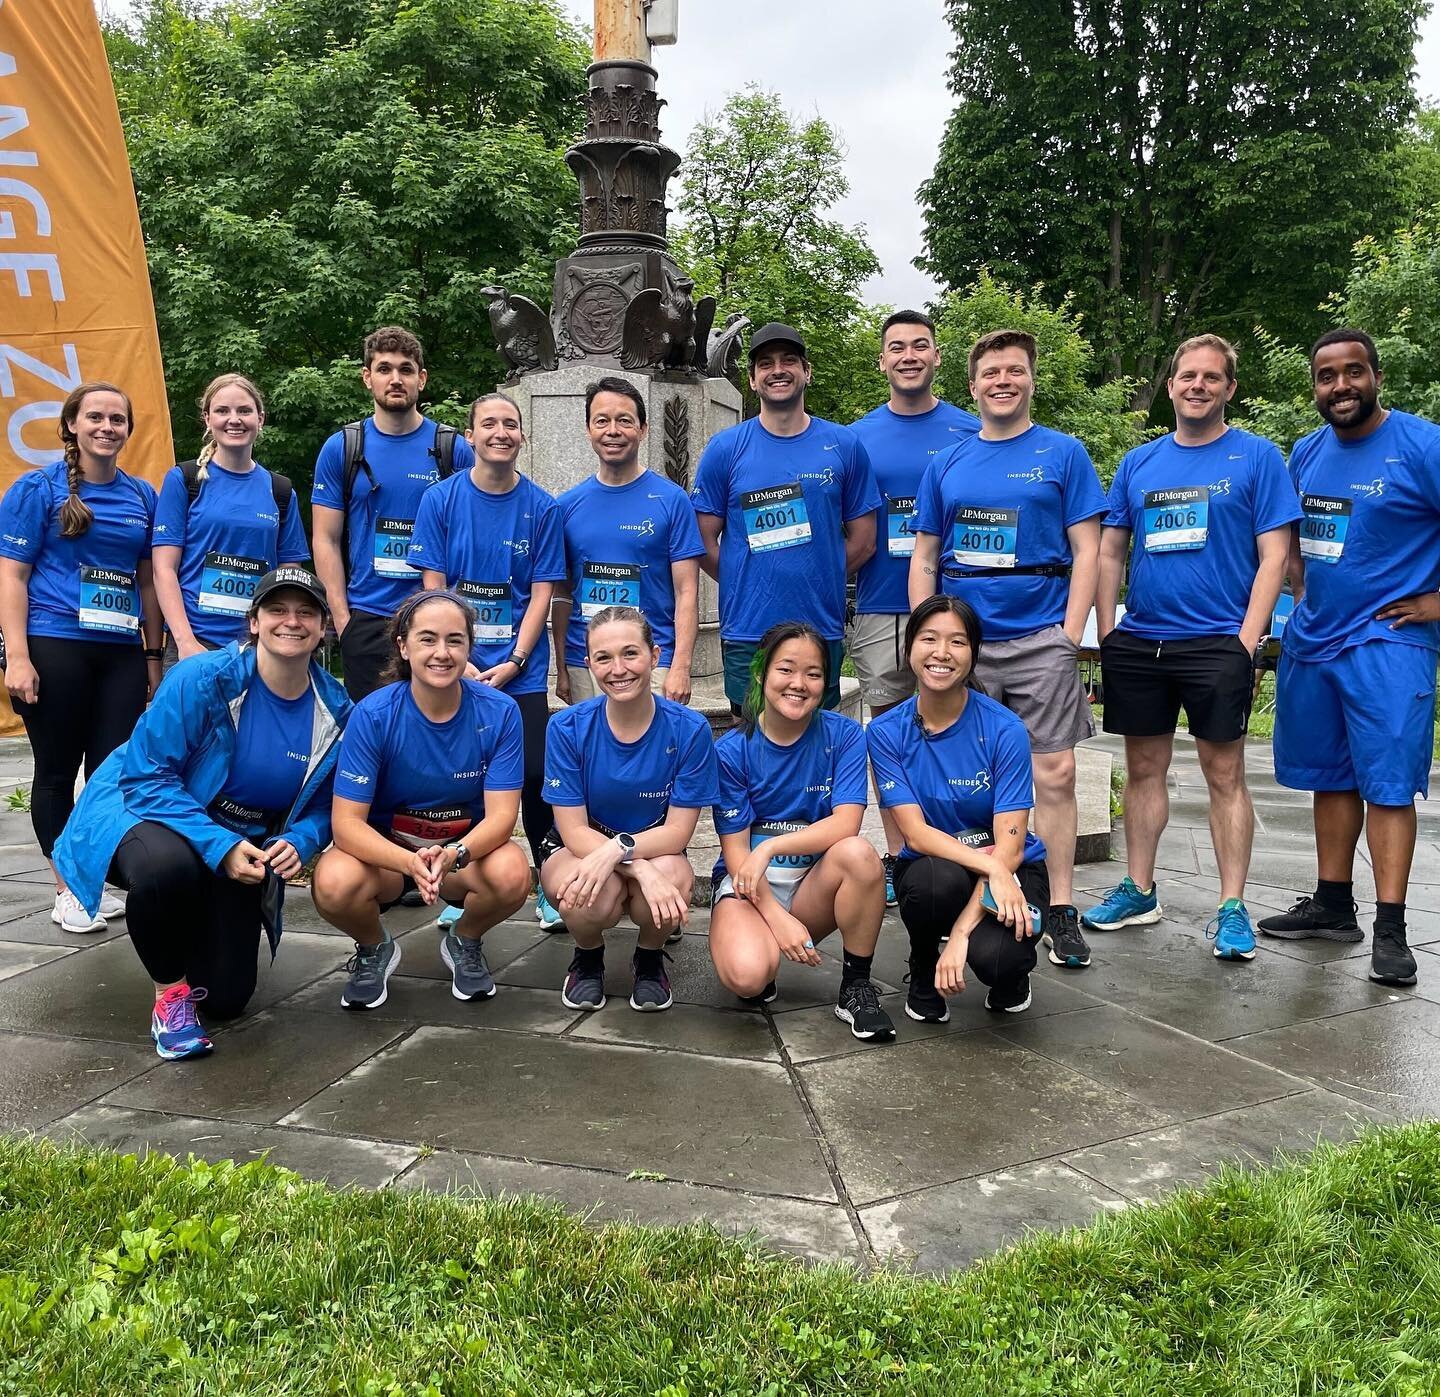 A round of applause for these Insiders who braved the rain to run in the 2022 JP Morgan Corporate Challenge last night in NYC!

Well done Albert Yoon, Alex Nicoll, Alexander Calbi, Alyse Kalish, Annie Fu, Brittany Chang, Daniel Hockley, Hana Albert, 